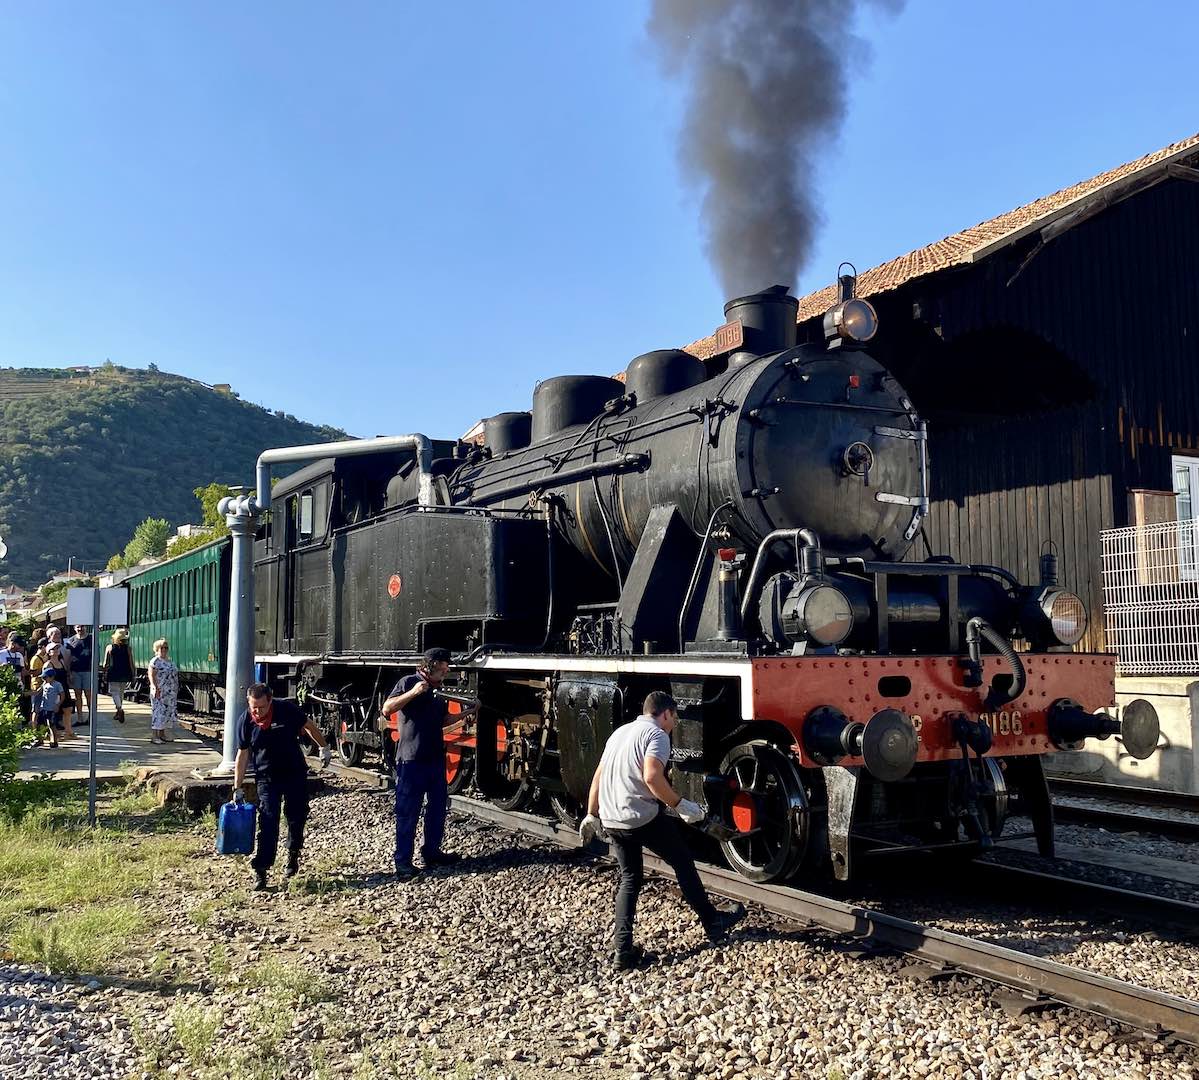 Some of the best experiences are free—like catching this old steam locomotive maintenance!